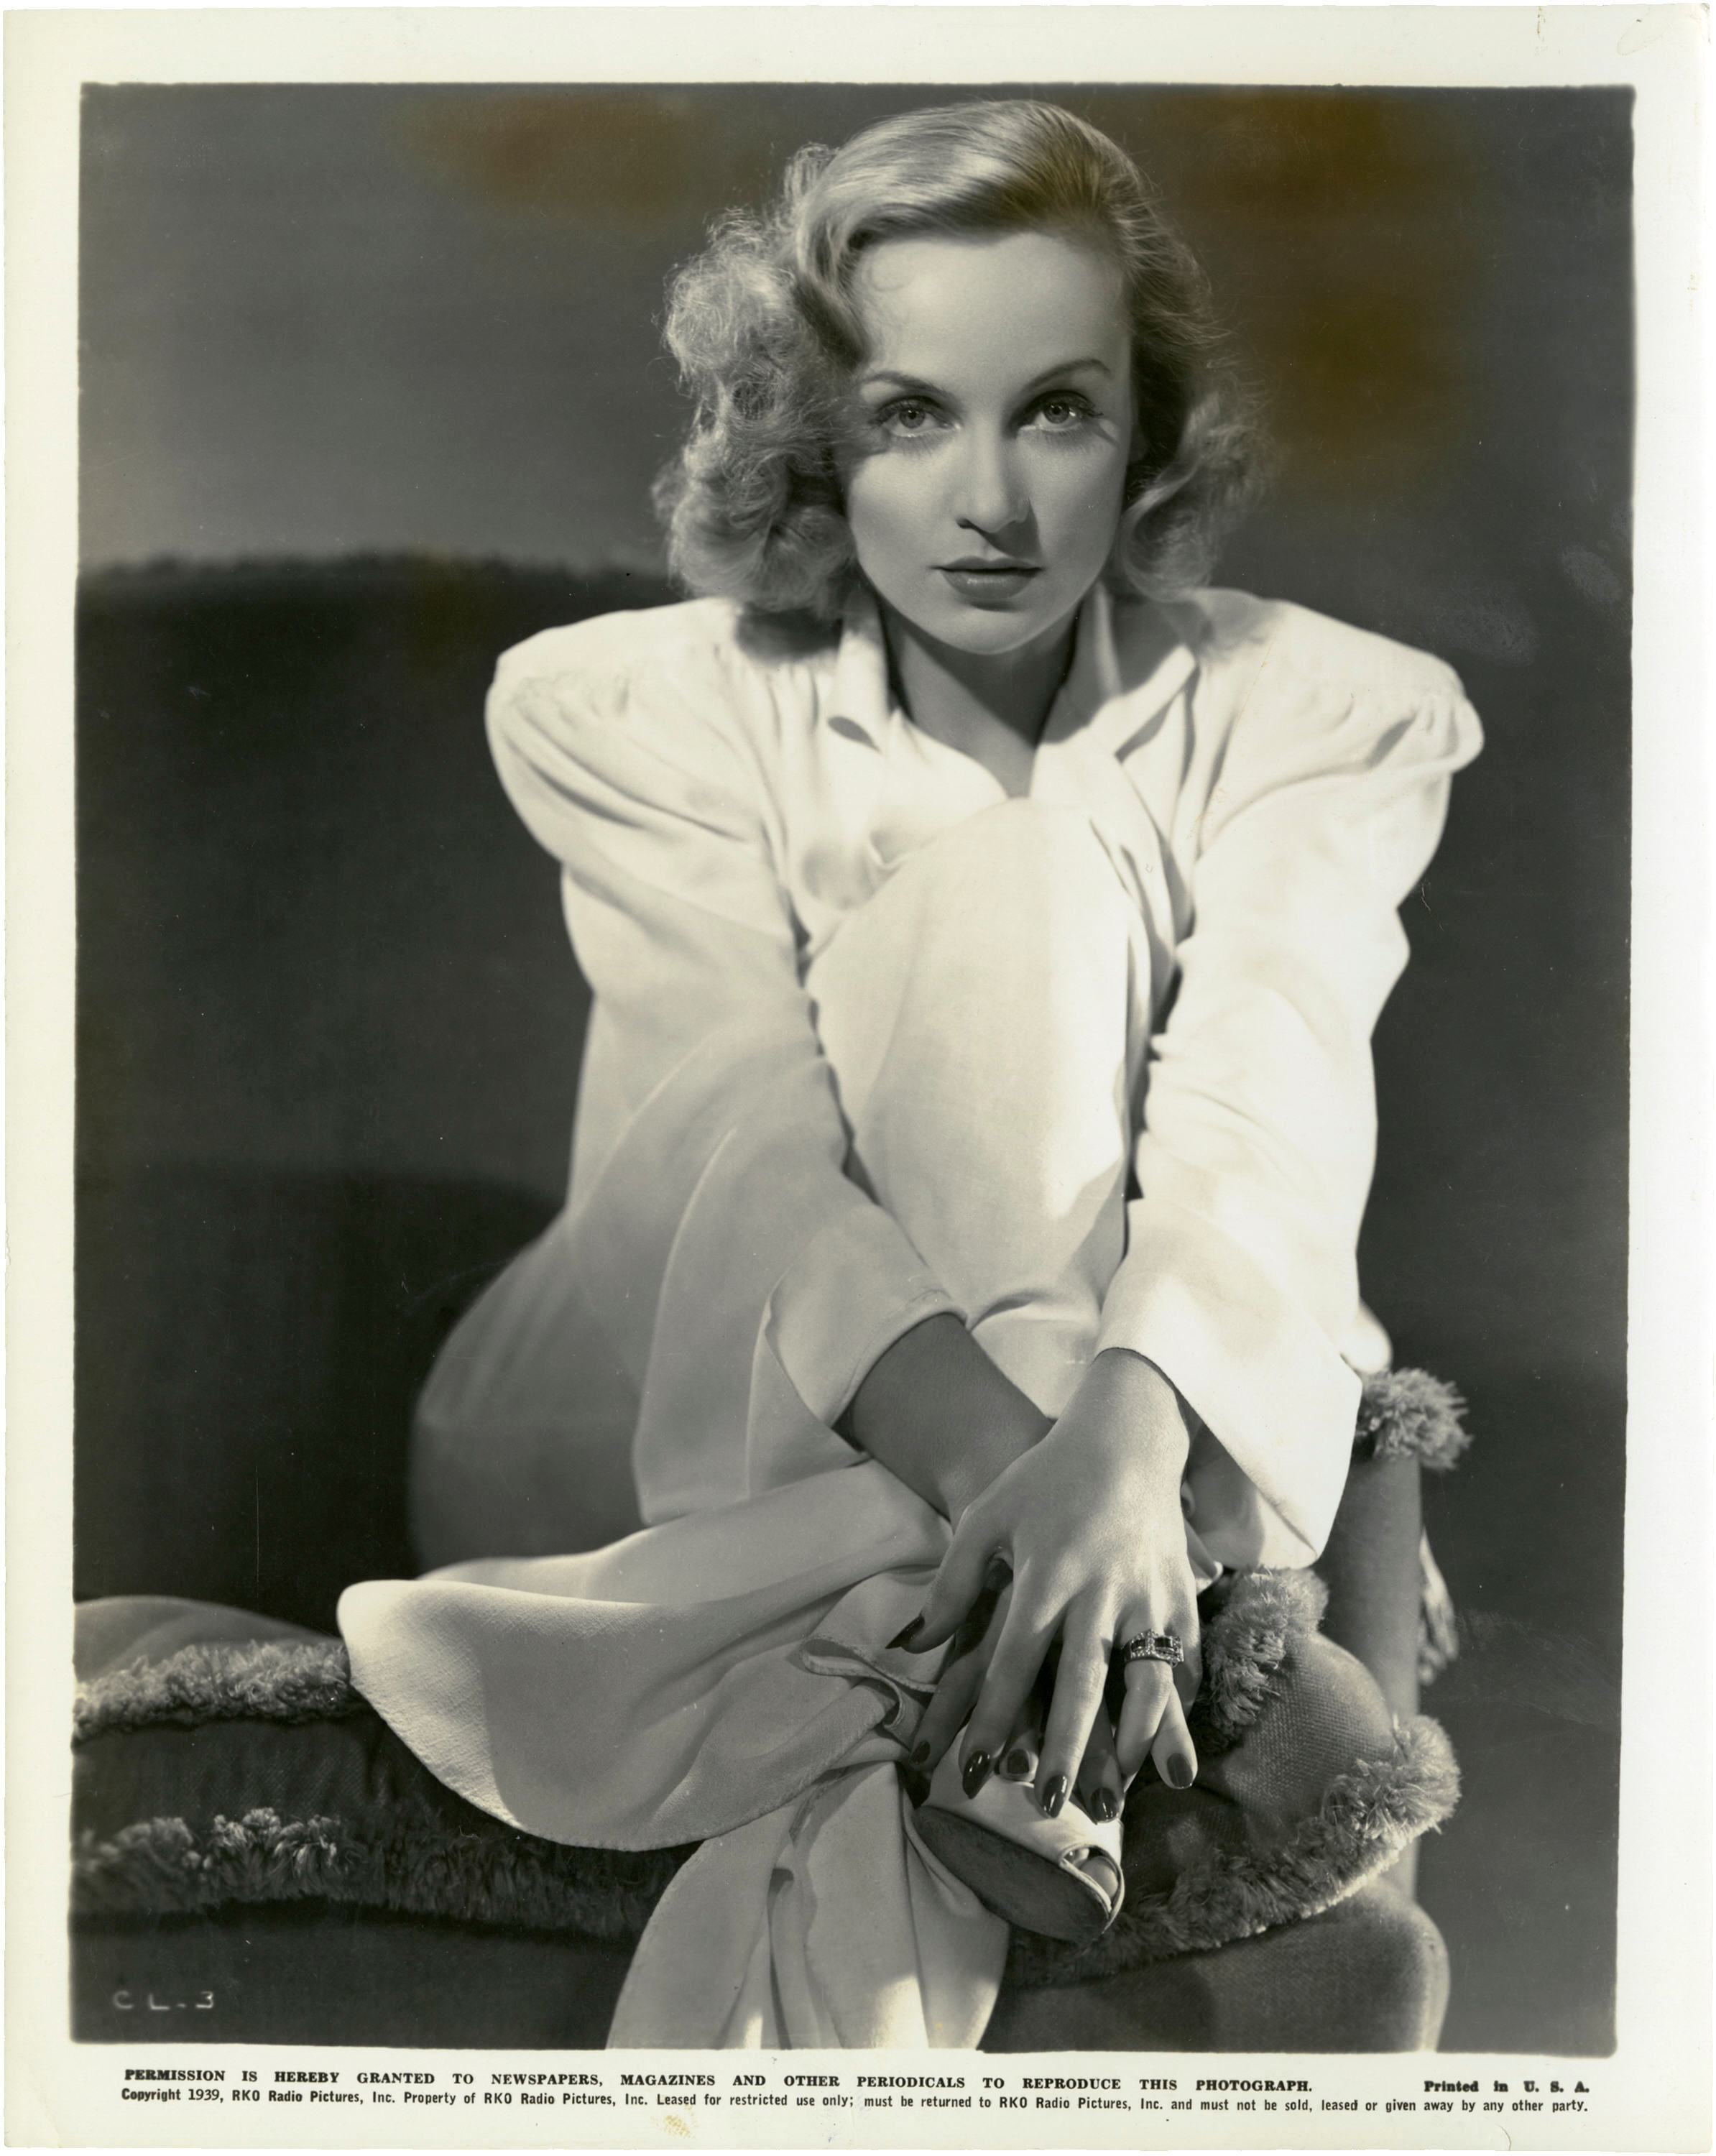 Pictures of Carole Lombard - Pictures Of Celebrities2388 x 3000